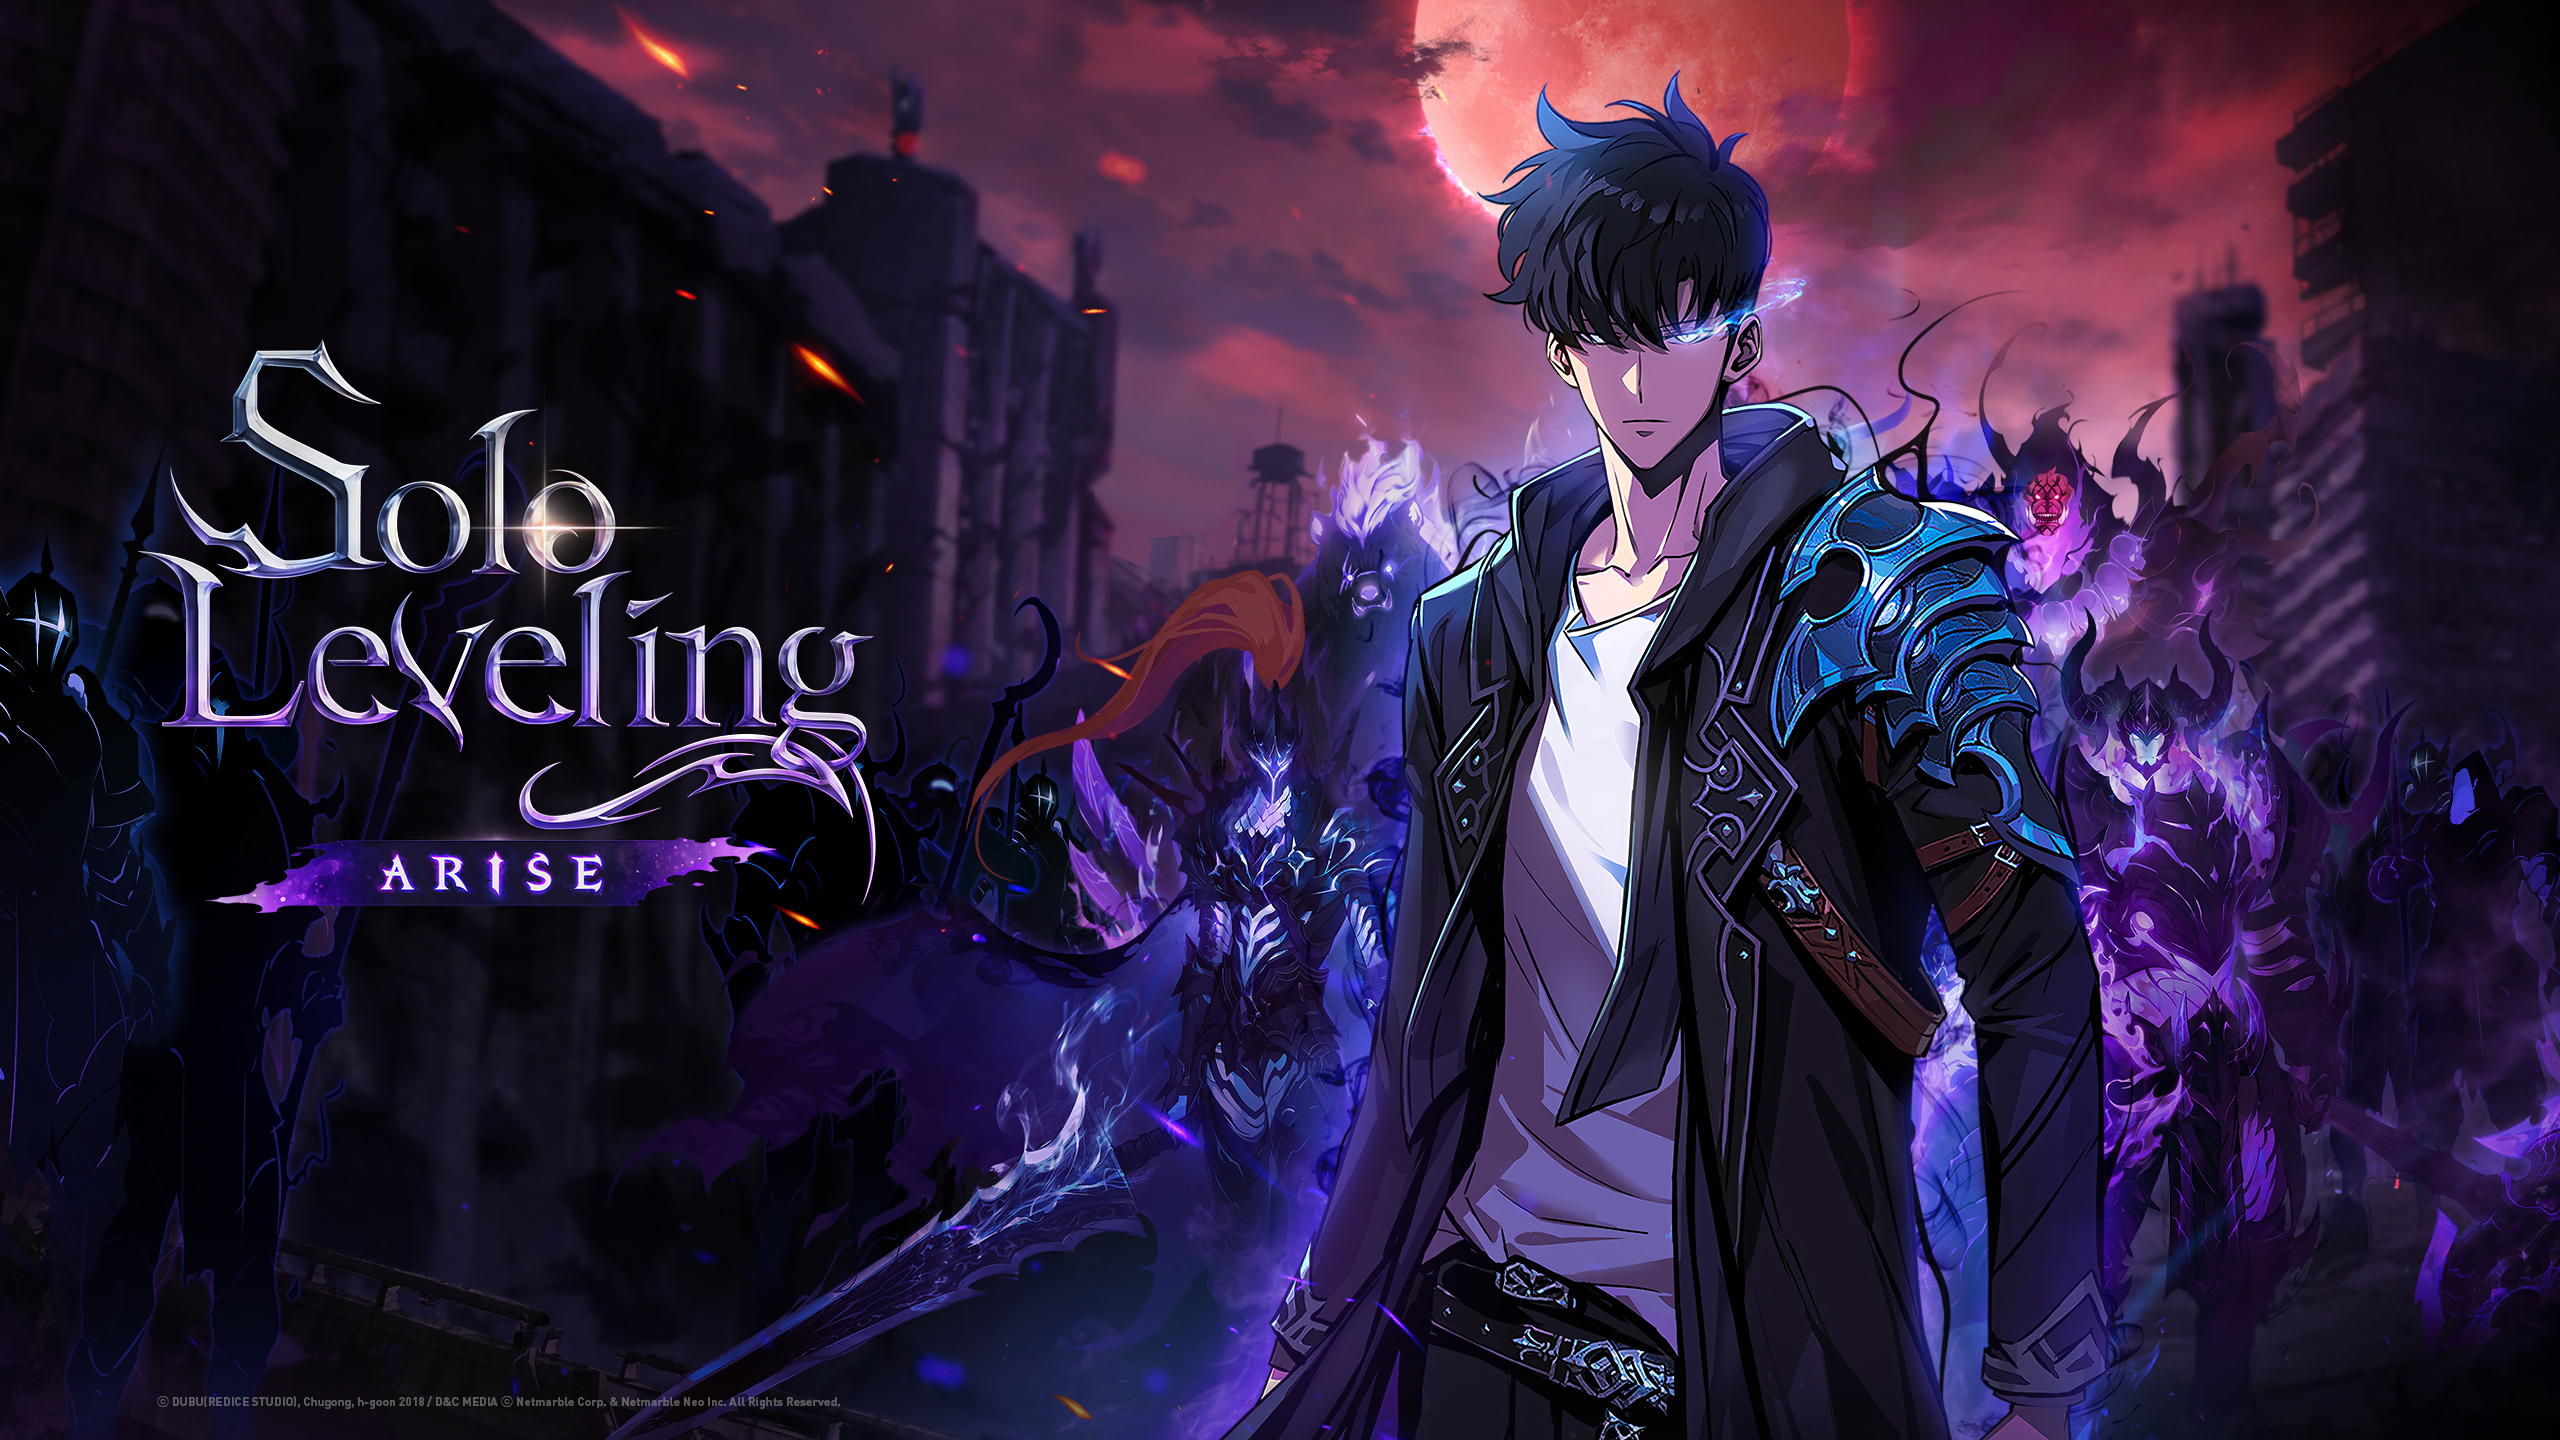 Sung Jin Woo Solo Leveling Arise Anime Games 2560x1440